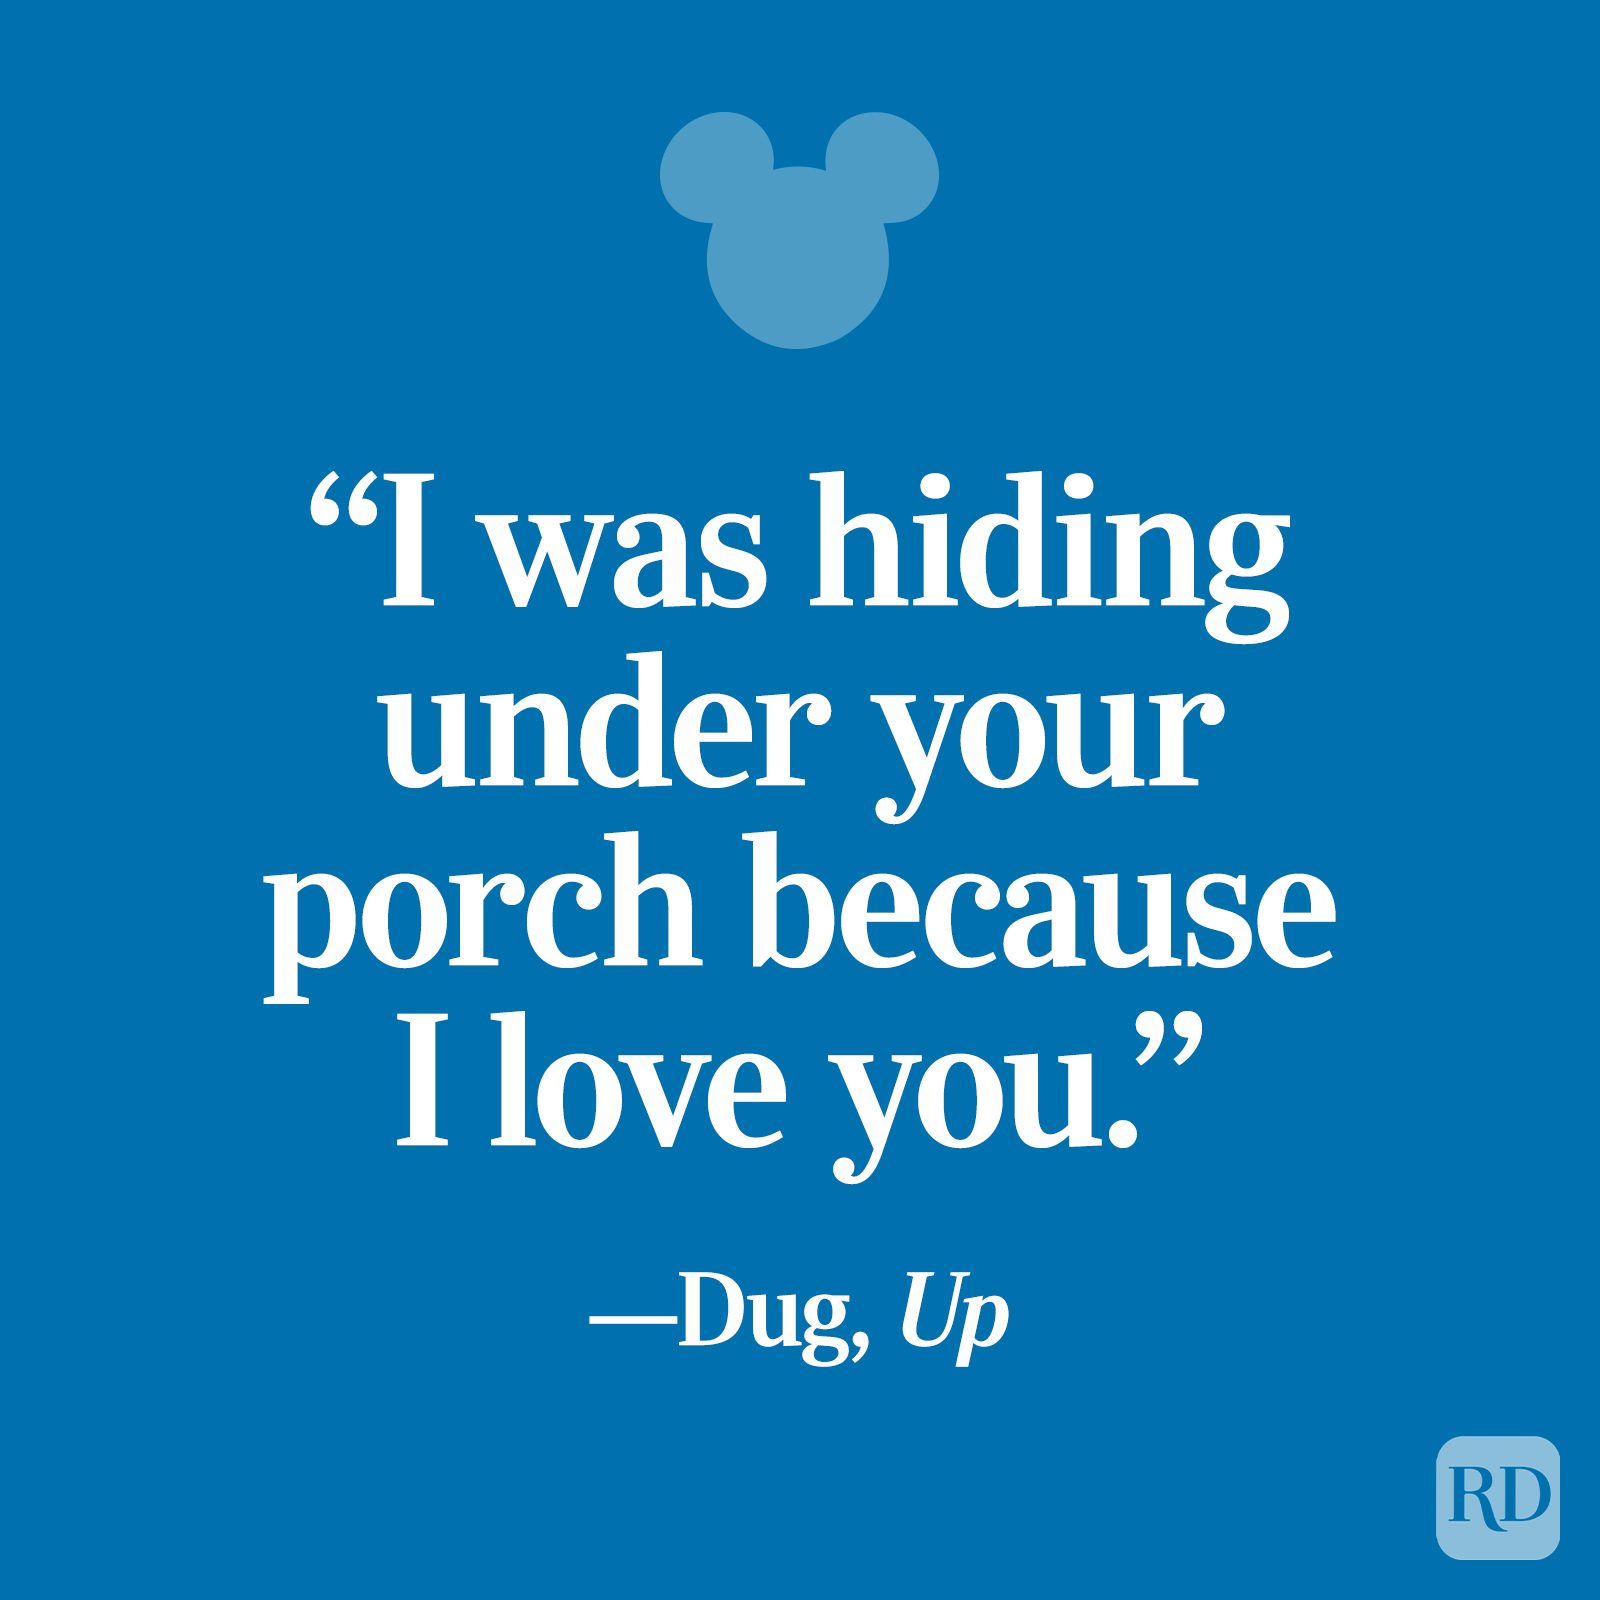 cute love quotes from disney movies